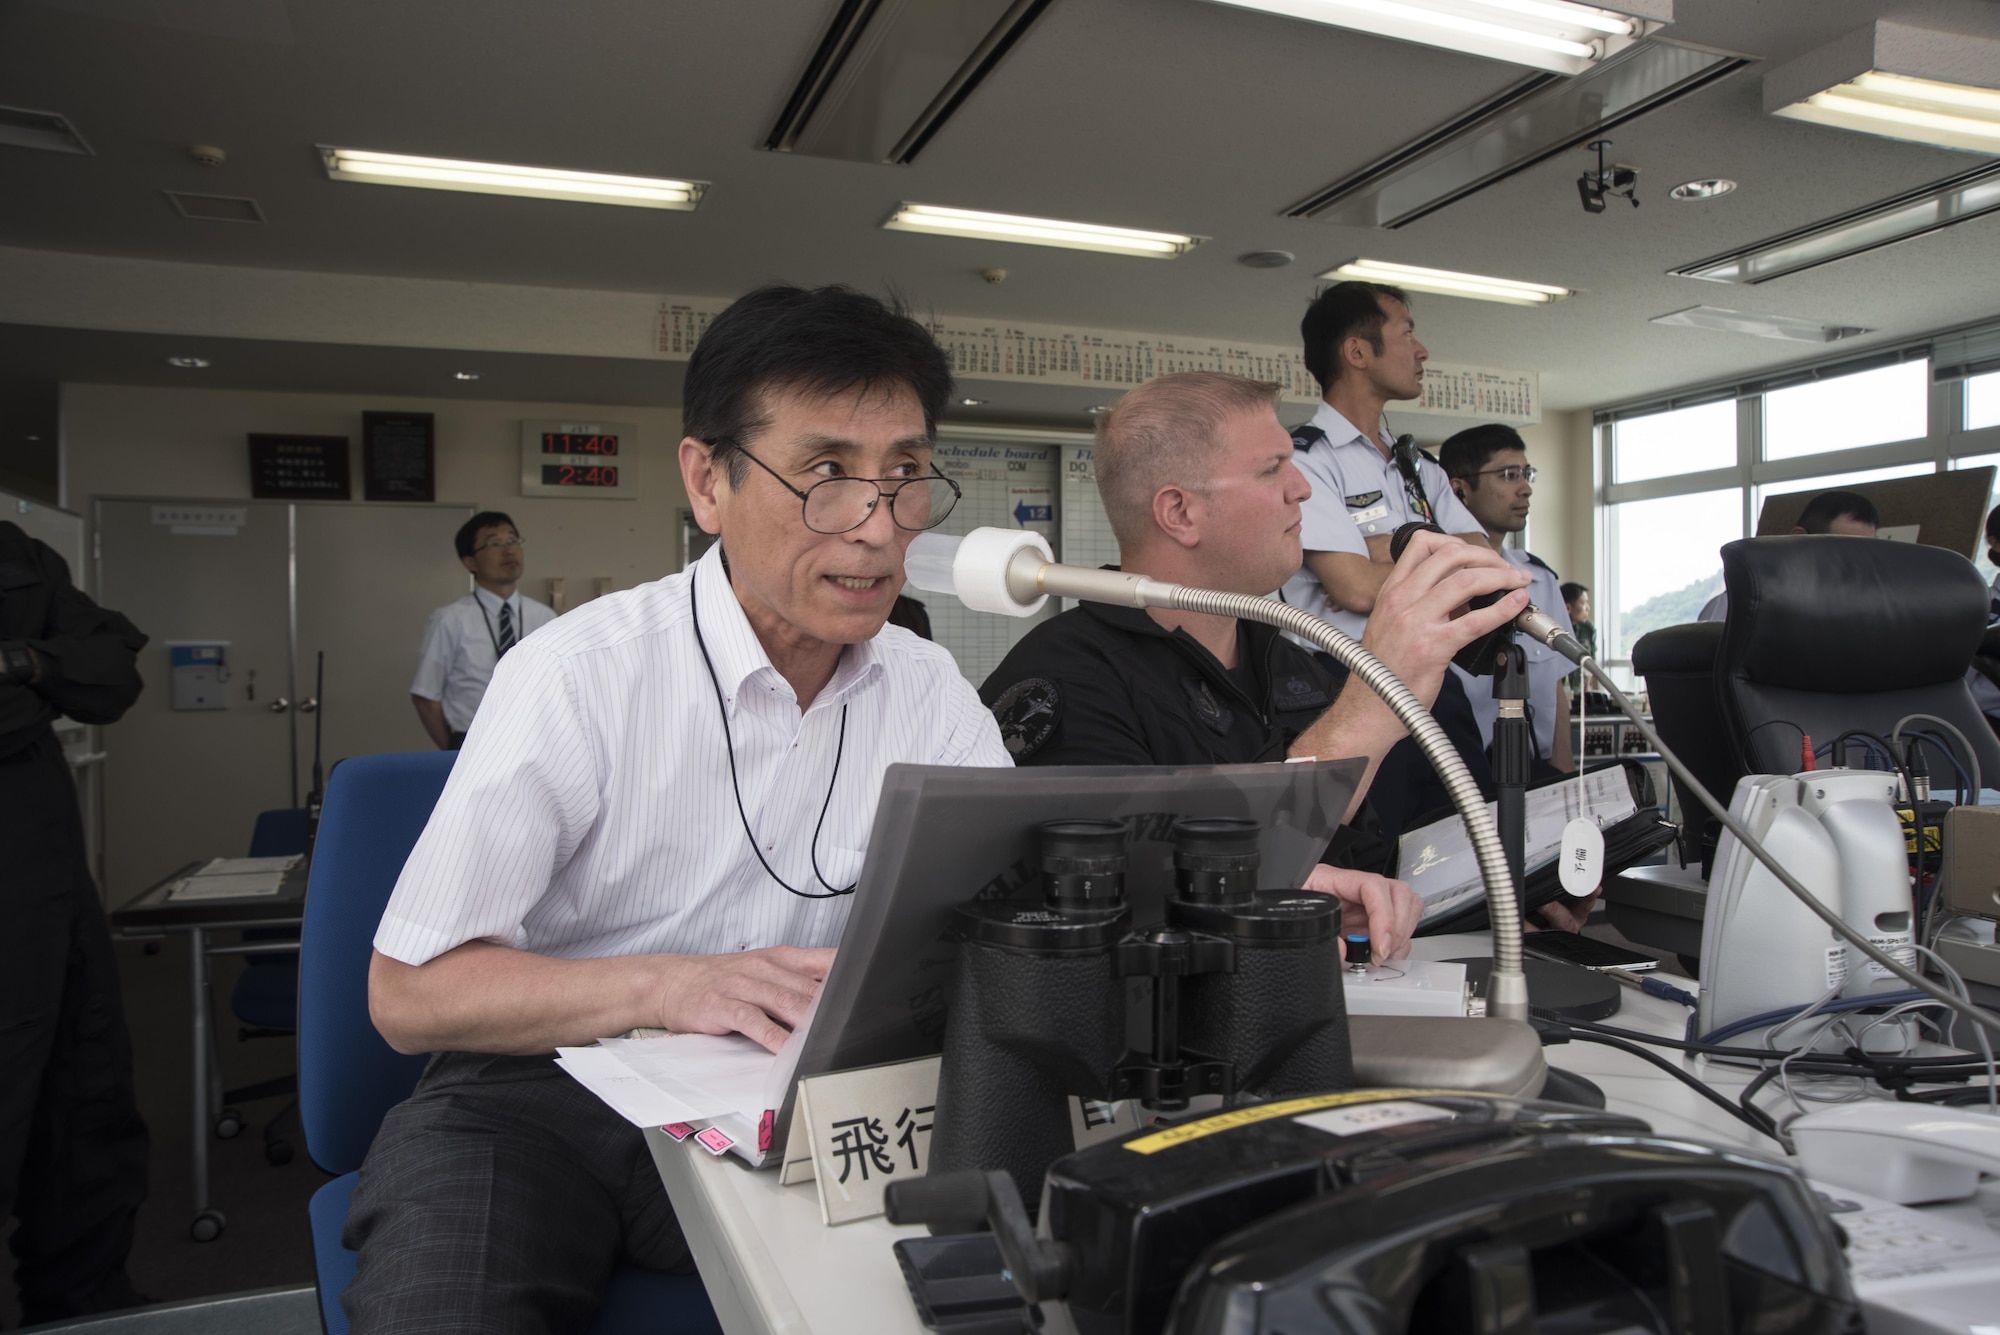 Hiromichi Nara, left, the Pacific Air Forces F-16 Demonstration Team translator and liaison, and U.S. Air Force Tech. Sgt. Tristan Berger, the PACAF F-16 Demonstration Team aerospace propulsion craftsman and narrator, announce the different maneuvers the demo pilot performs  during the Hofu Air Festival, May 21, 2017 at Hofu-kita Air Base, Japan. Nara joined the demo team at its inception almost 20 years ago. Berger became a team member one year ago. The primary objective of the team is to showcase the F-16 Fighting Falcon’s capabilities to countries that fall within PACAF’s area of responsibility. (U.S. Air Force photo by Staff Sgt. Melanie Hutto)